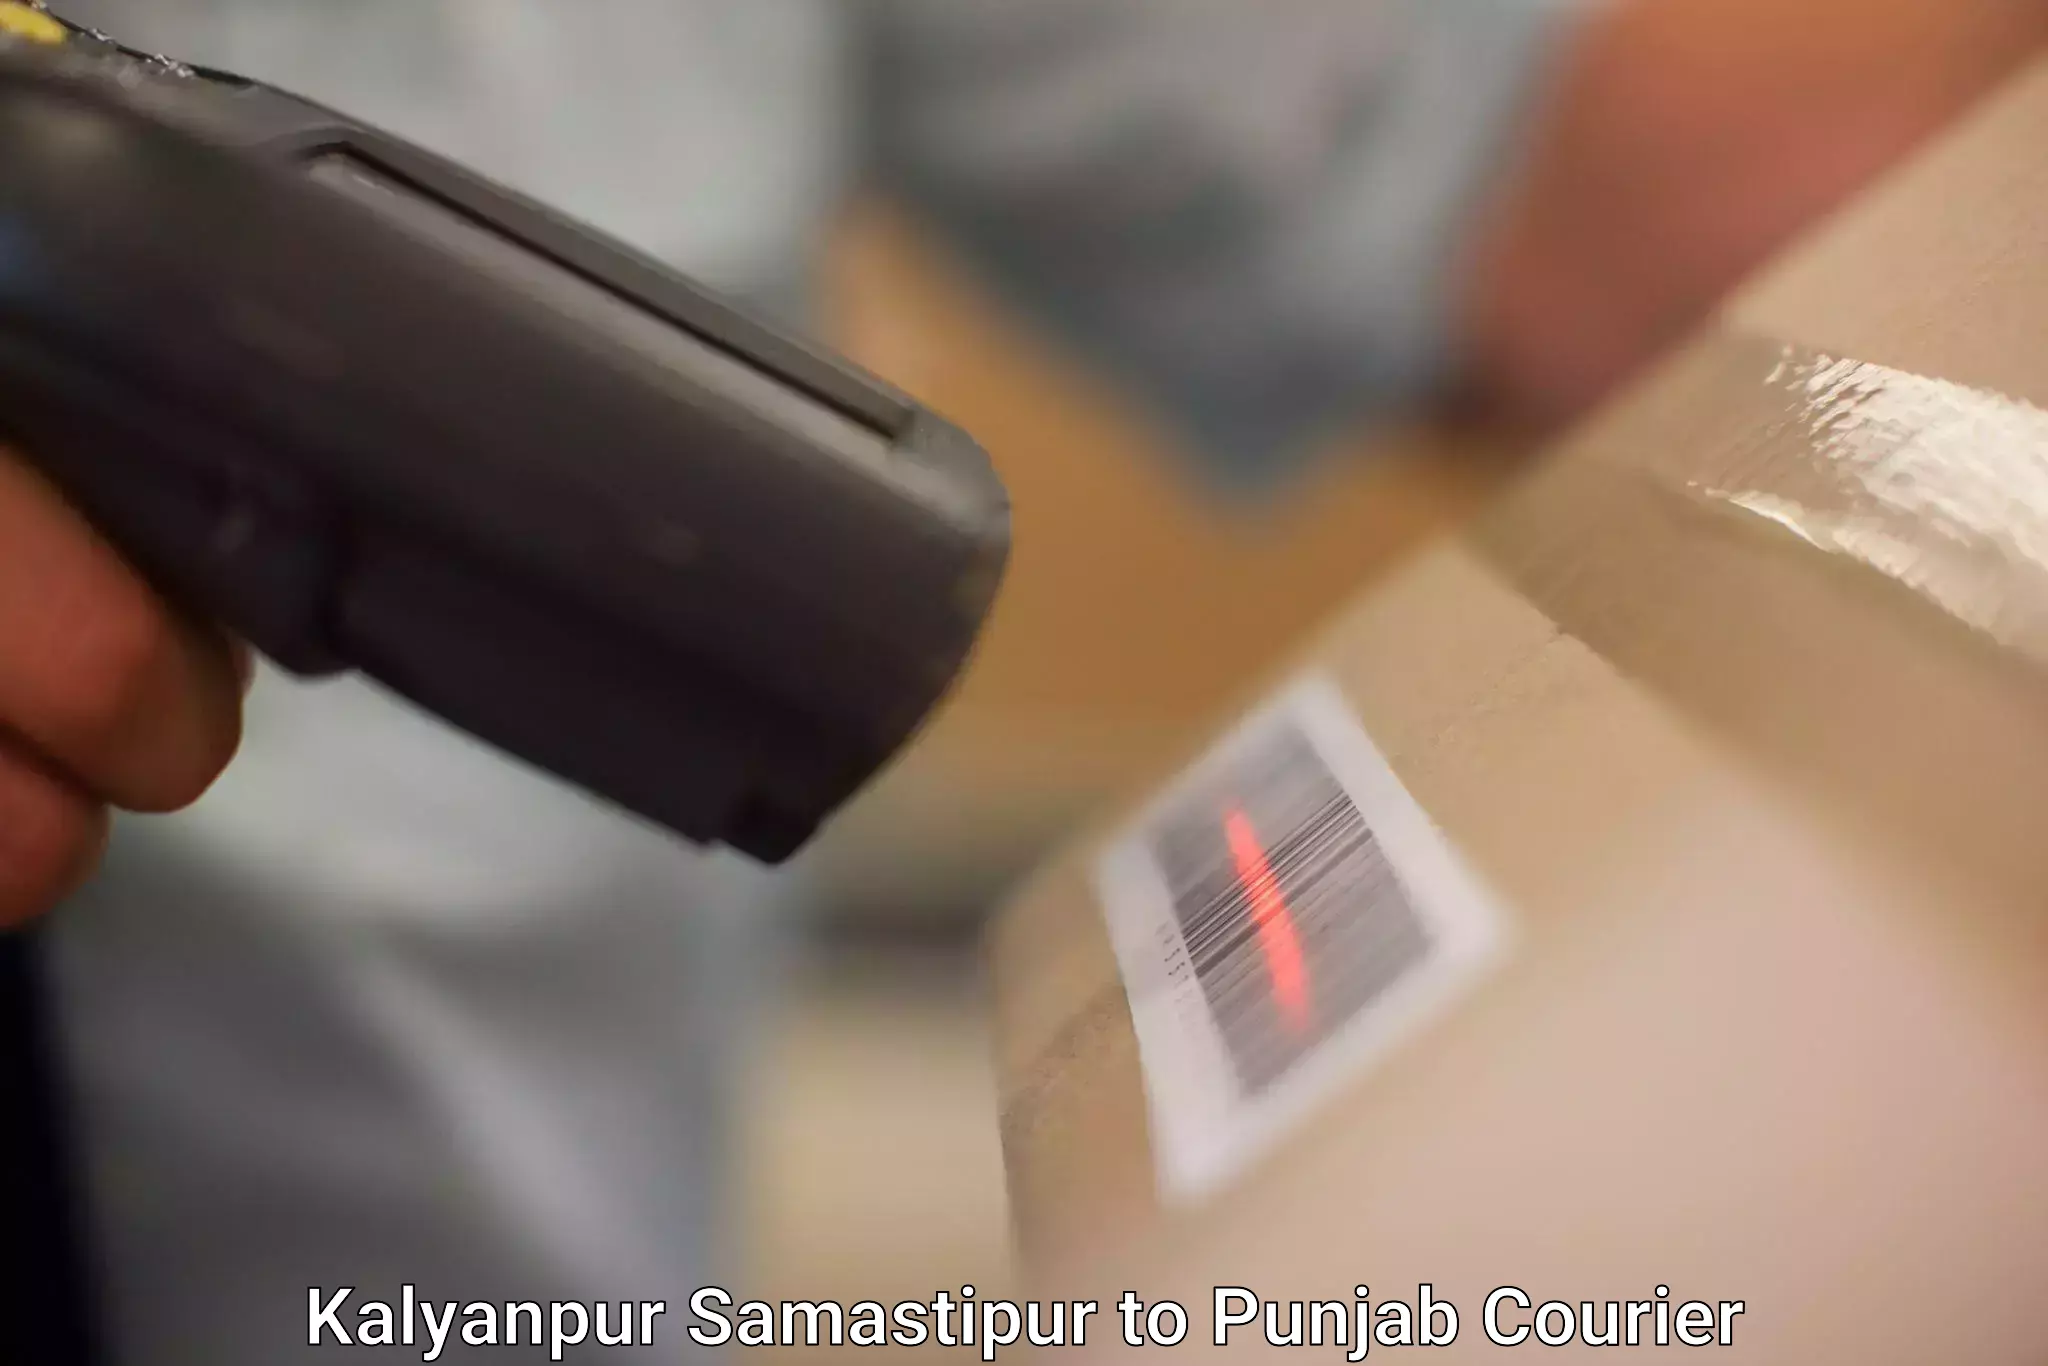 State-of-the-art courier technology Kalyanpur Samastipur to IIT Ropar